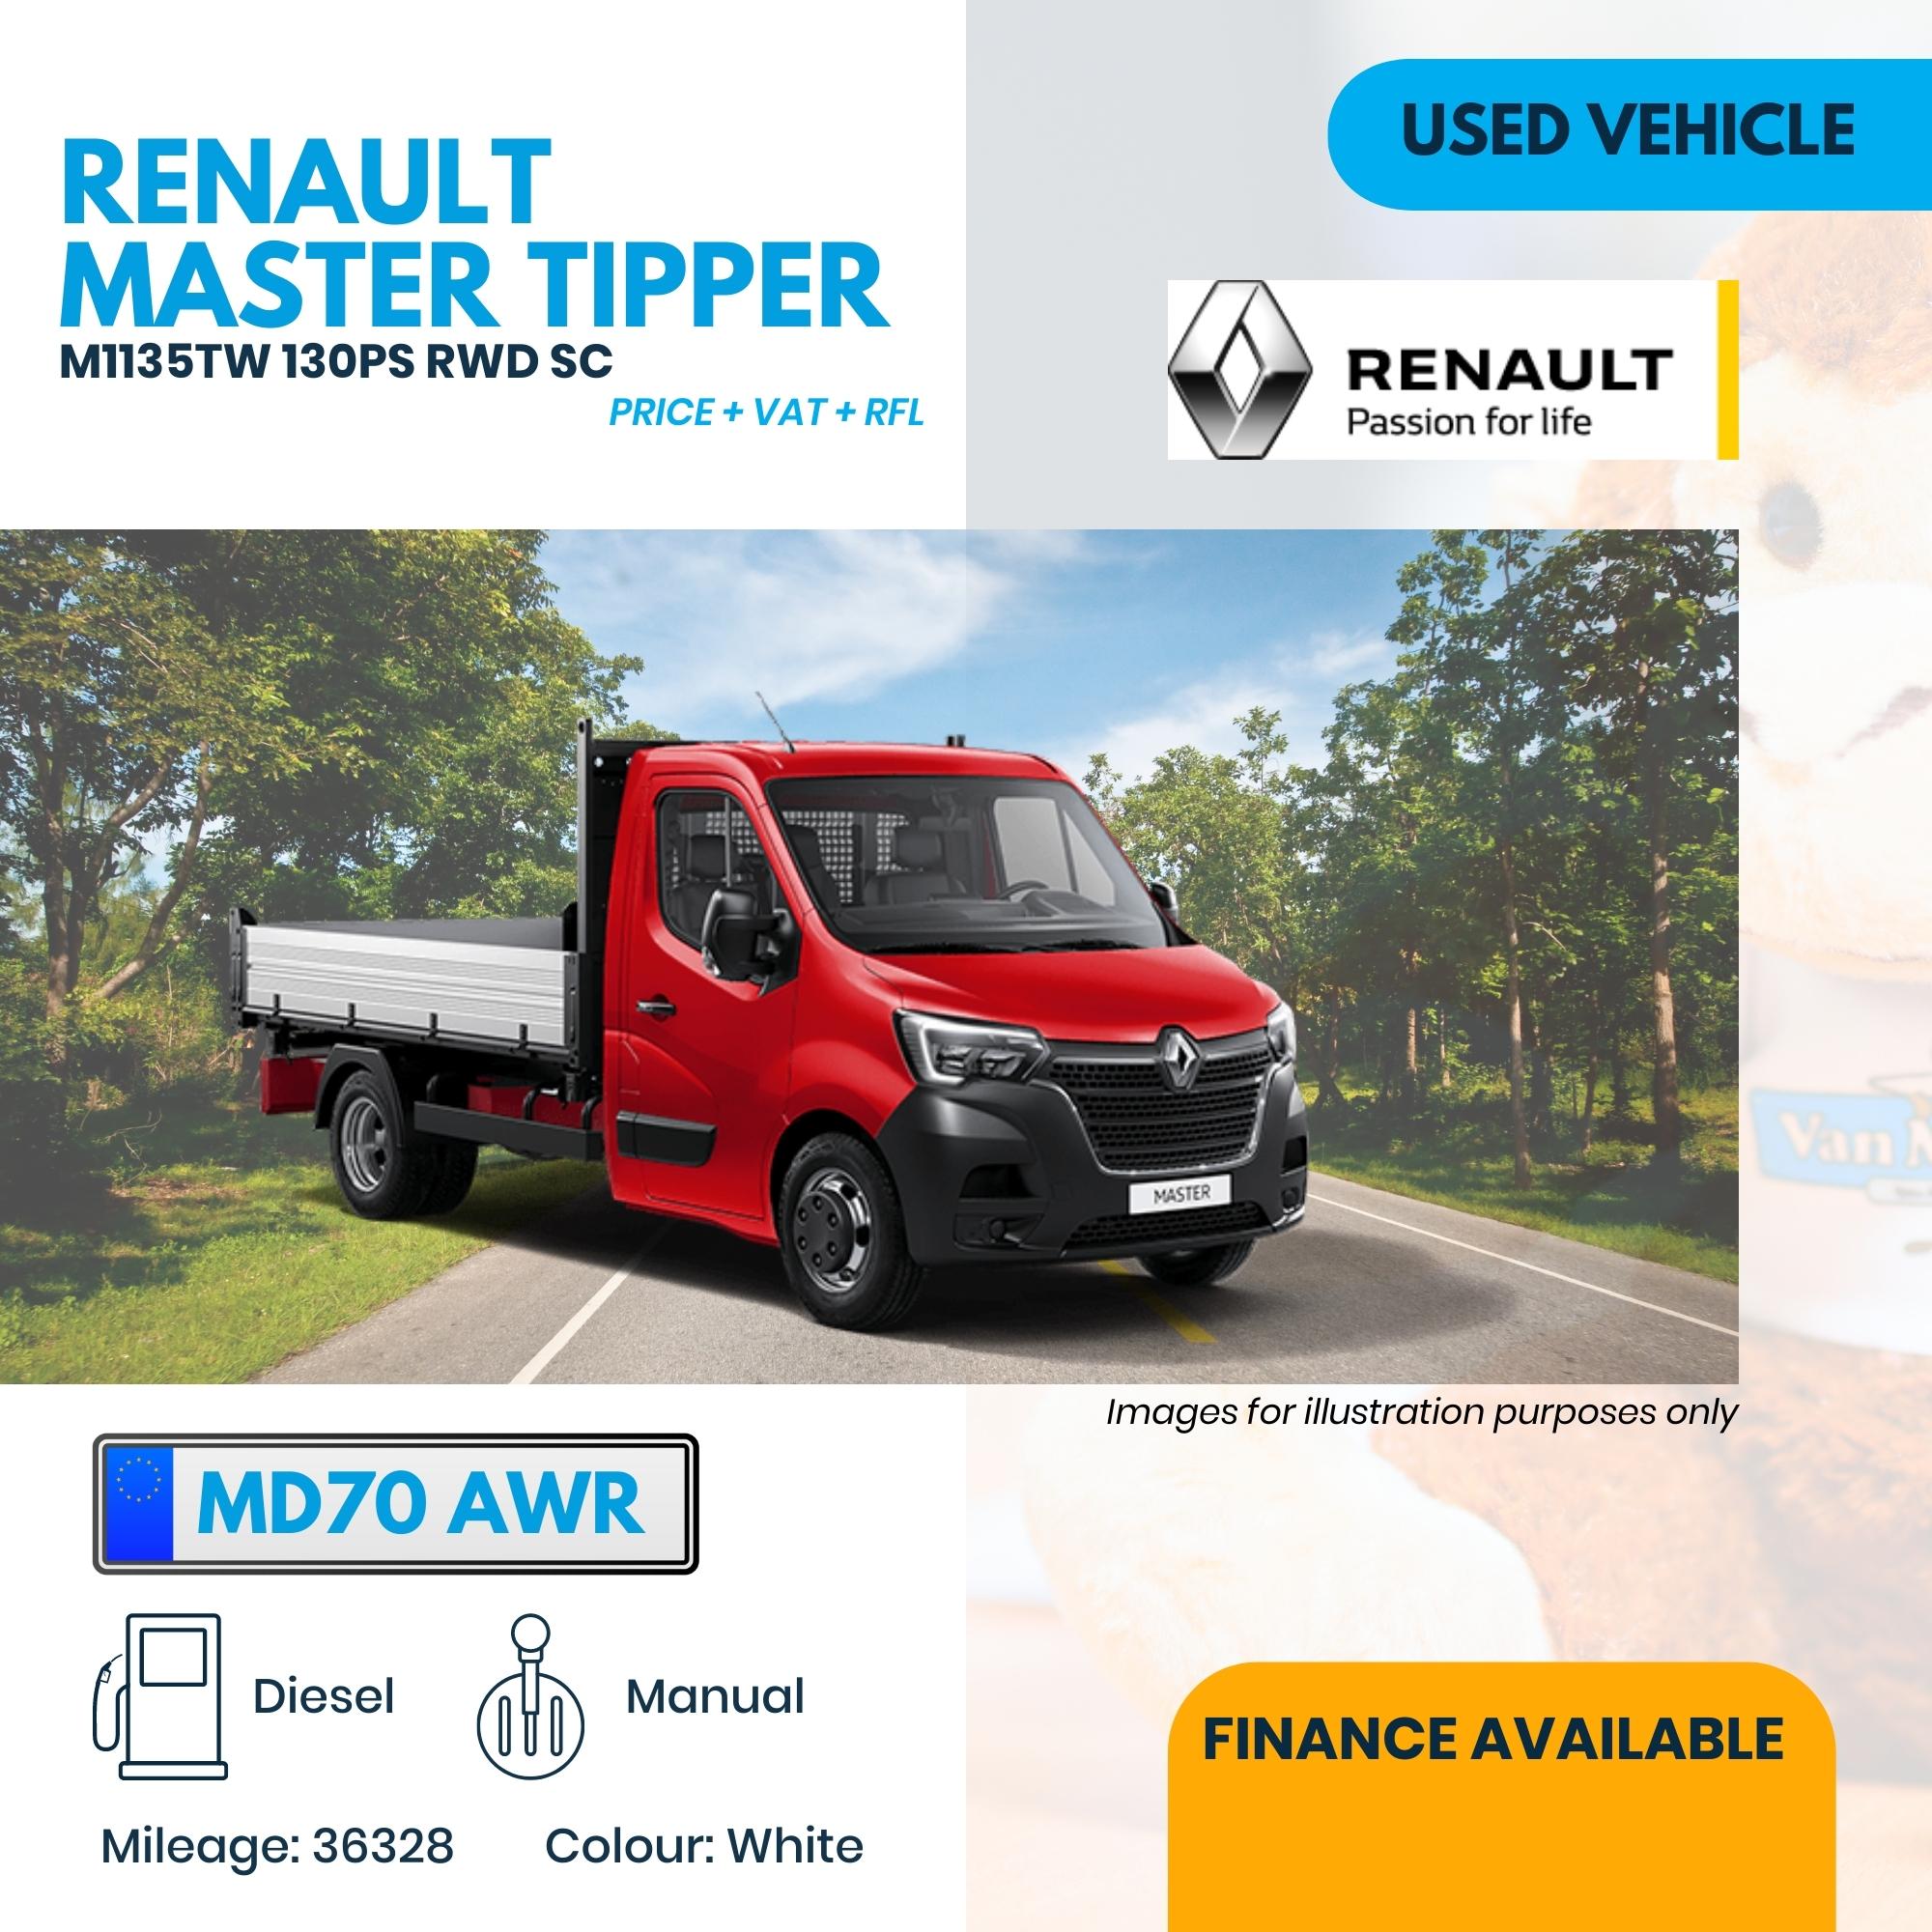 Used Renault Master Tipper